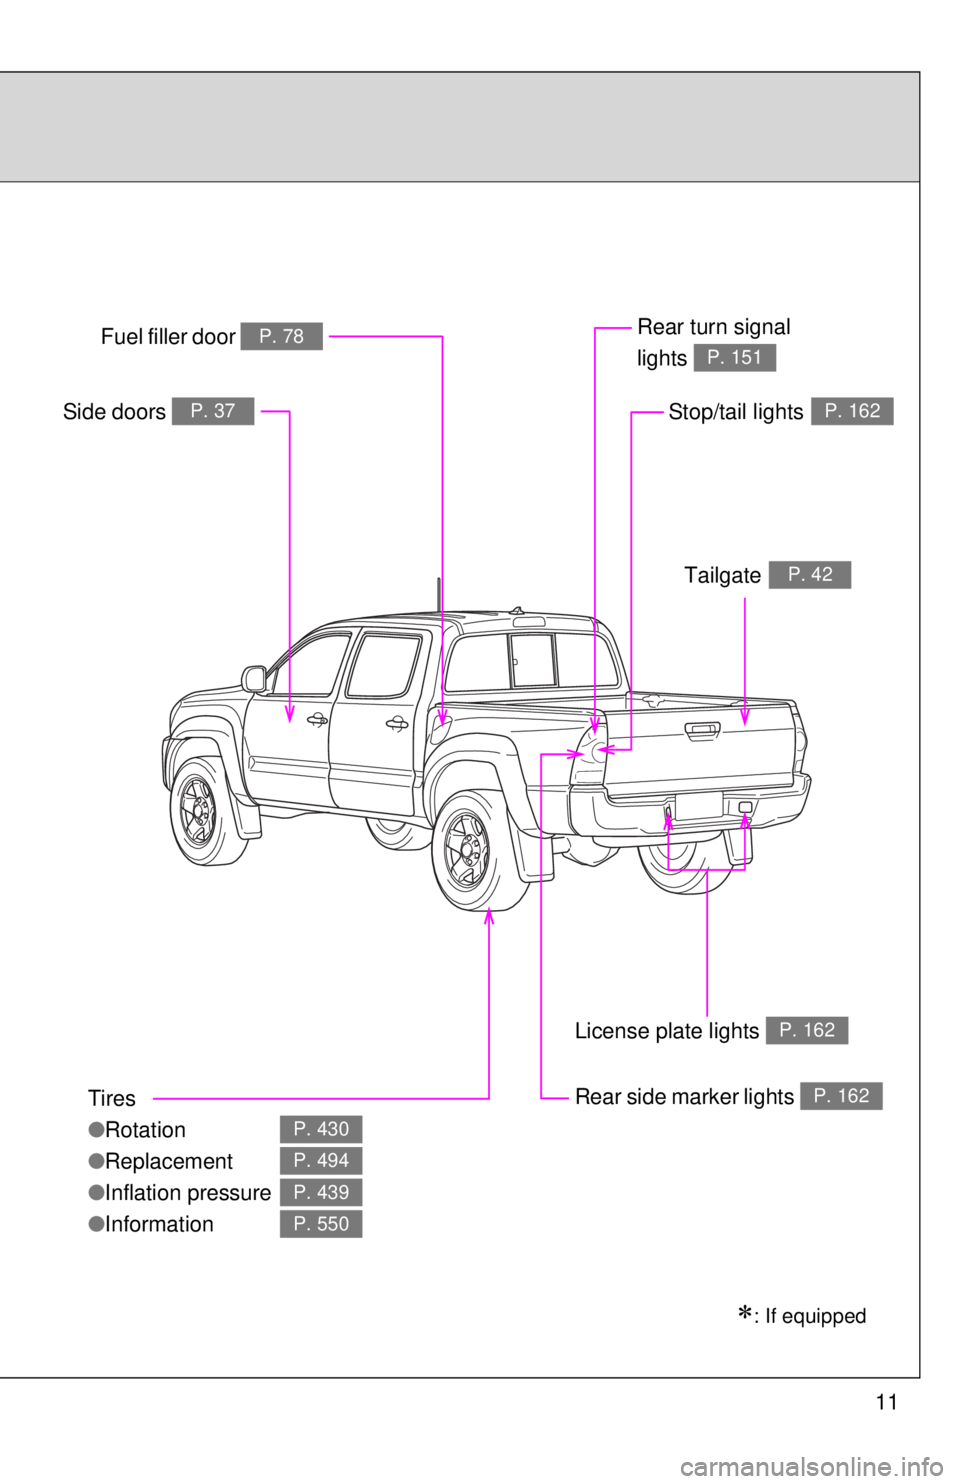 TOYOTA TACOMA 2014  Owners Manual (in English) 11
Tires
●Rotation
● Replacement
● Inflation pressure
● Information
P. 430
P. 494
P. 439
P. 550
Fuel filler door P. 78Rear turn signal 
lights 
P. 151
Rear side marker lightsP. 162
Side doo